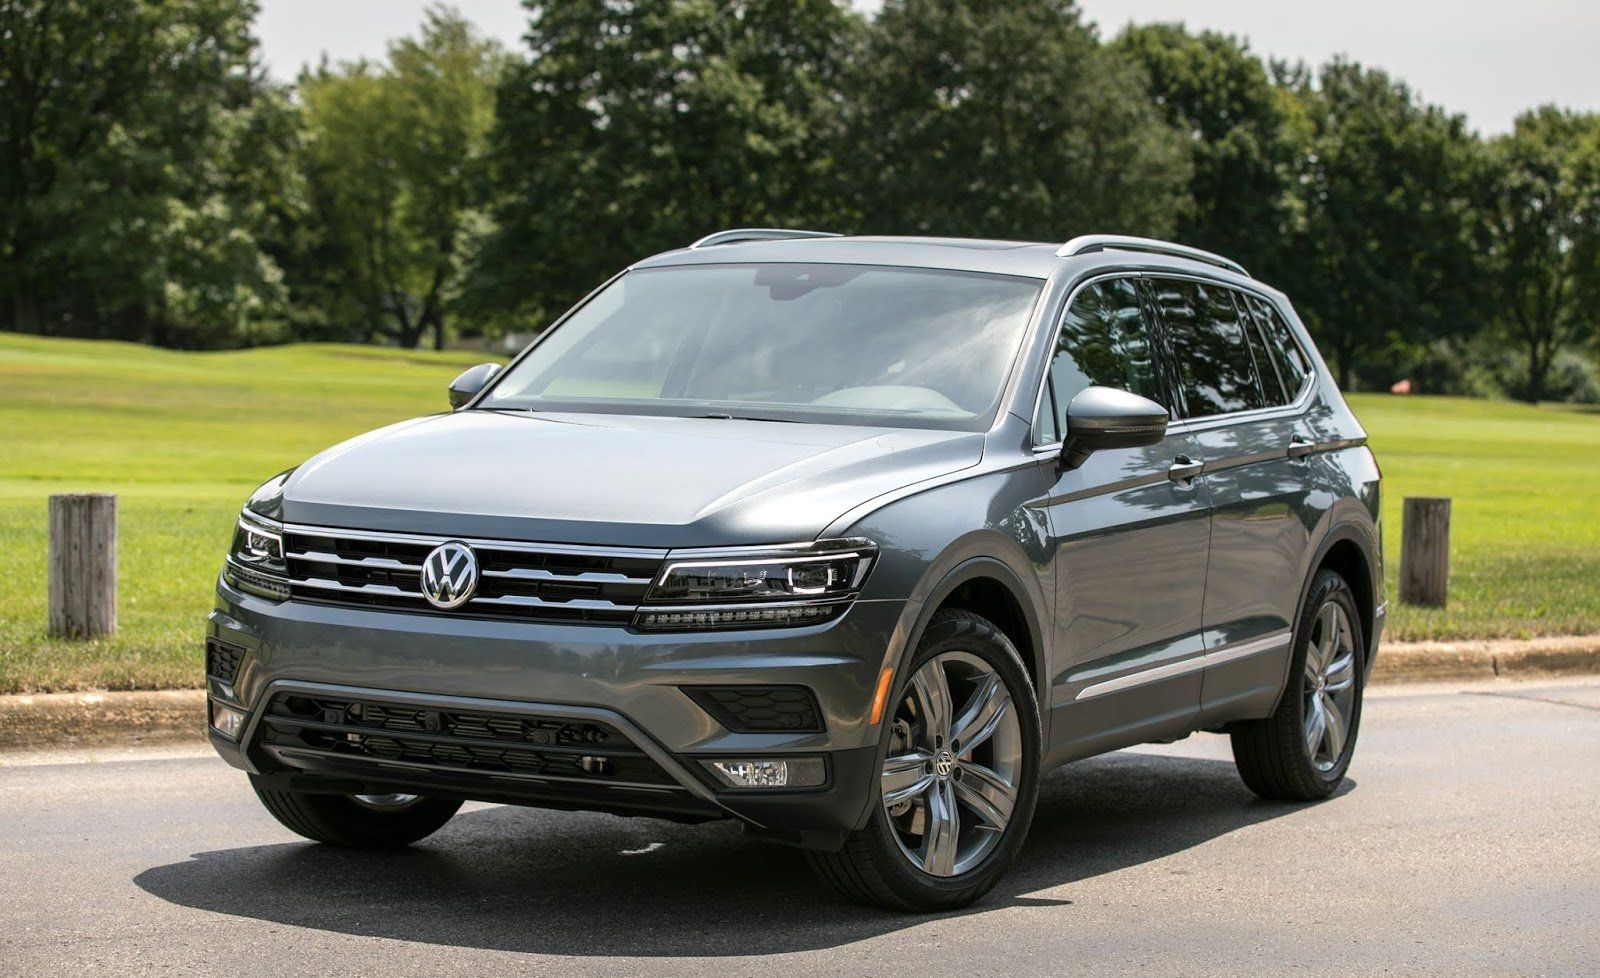 2018-volkswagen-tiguan-safety-and-driver-assistance-review-car-and-driver-photo-703444-s-original.jpg